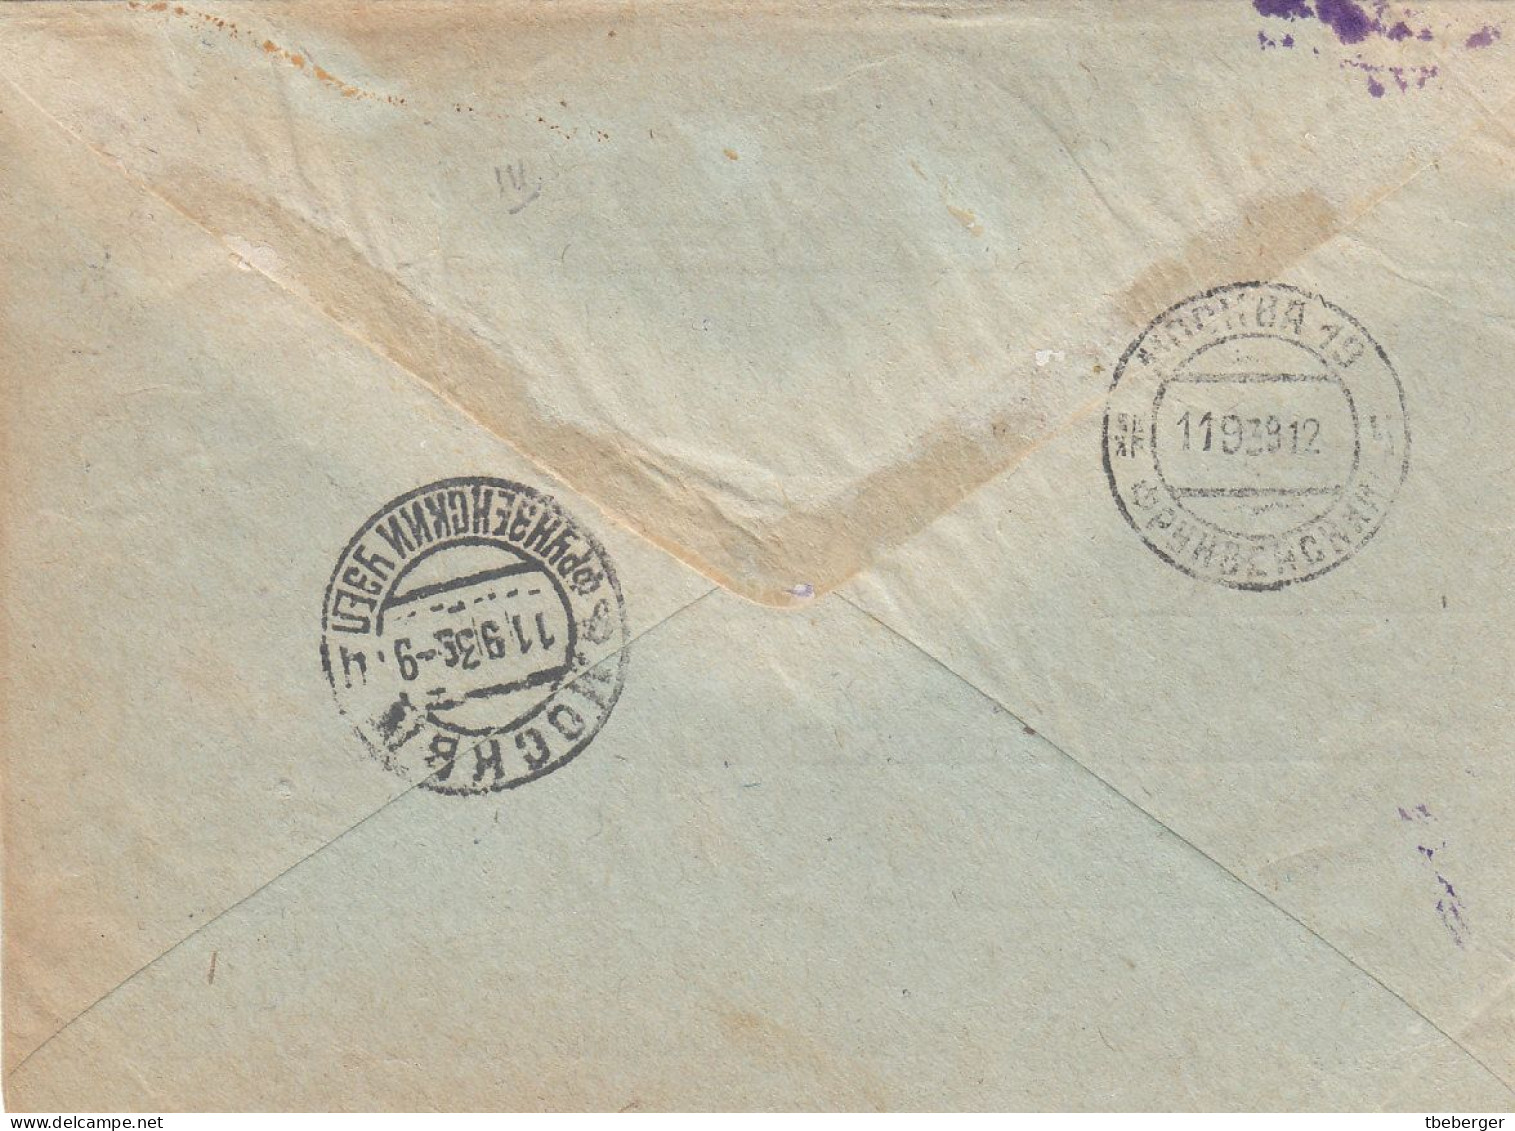 Russia USSR 1935 MOSCOW Local Official Registered Cover, 'SVOR VZYAKAN' Noted In Cds, Ex Miskin (ai70) - Covers & Documents